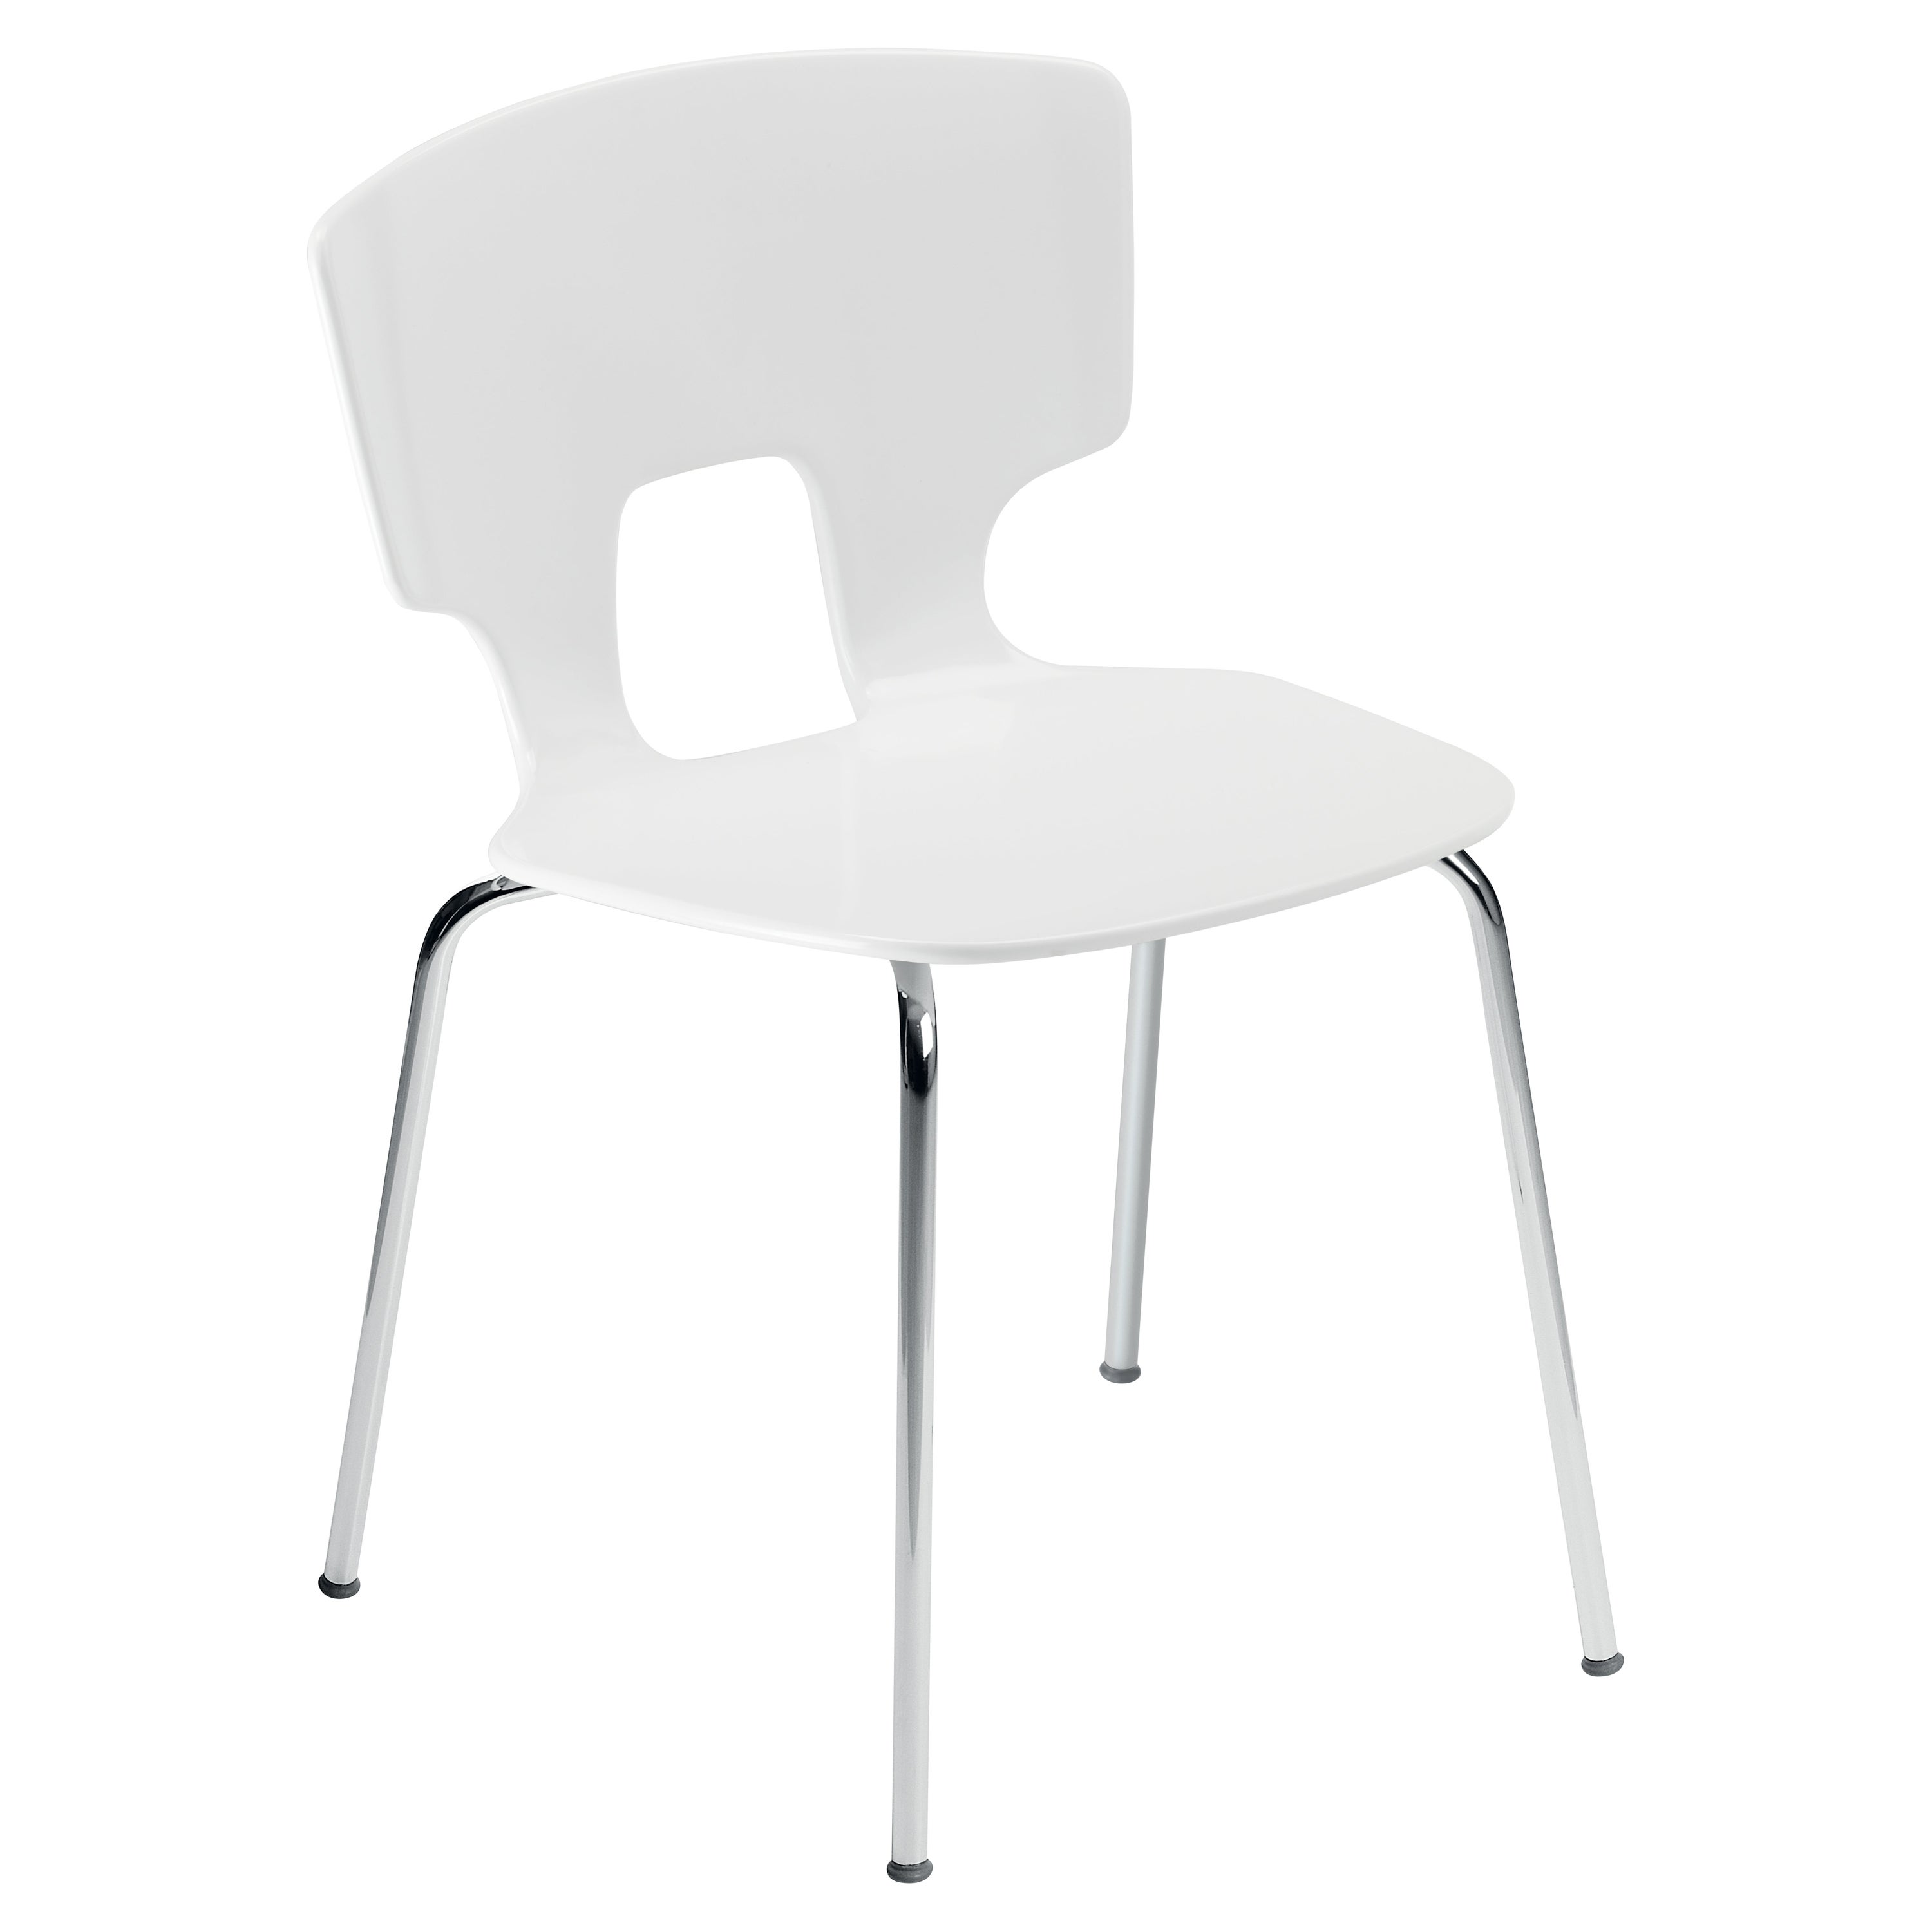 Alias 50A Erice Chair in White Chromed Steel Frame by Alfredo Häberli For Sale